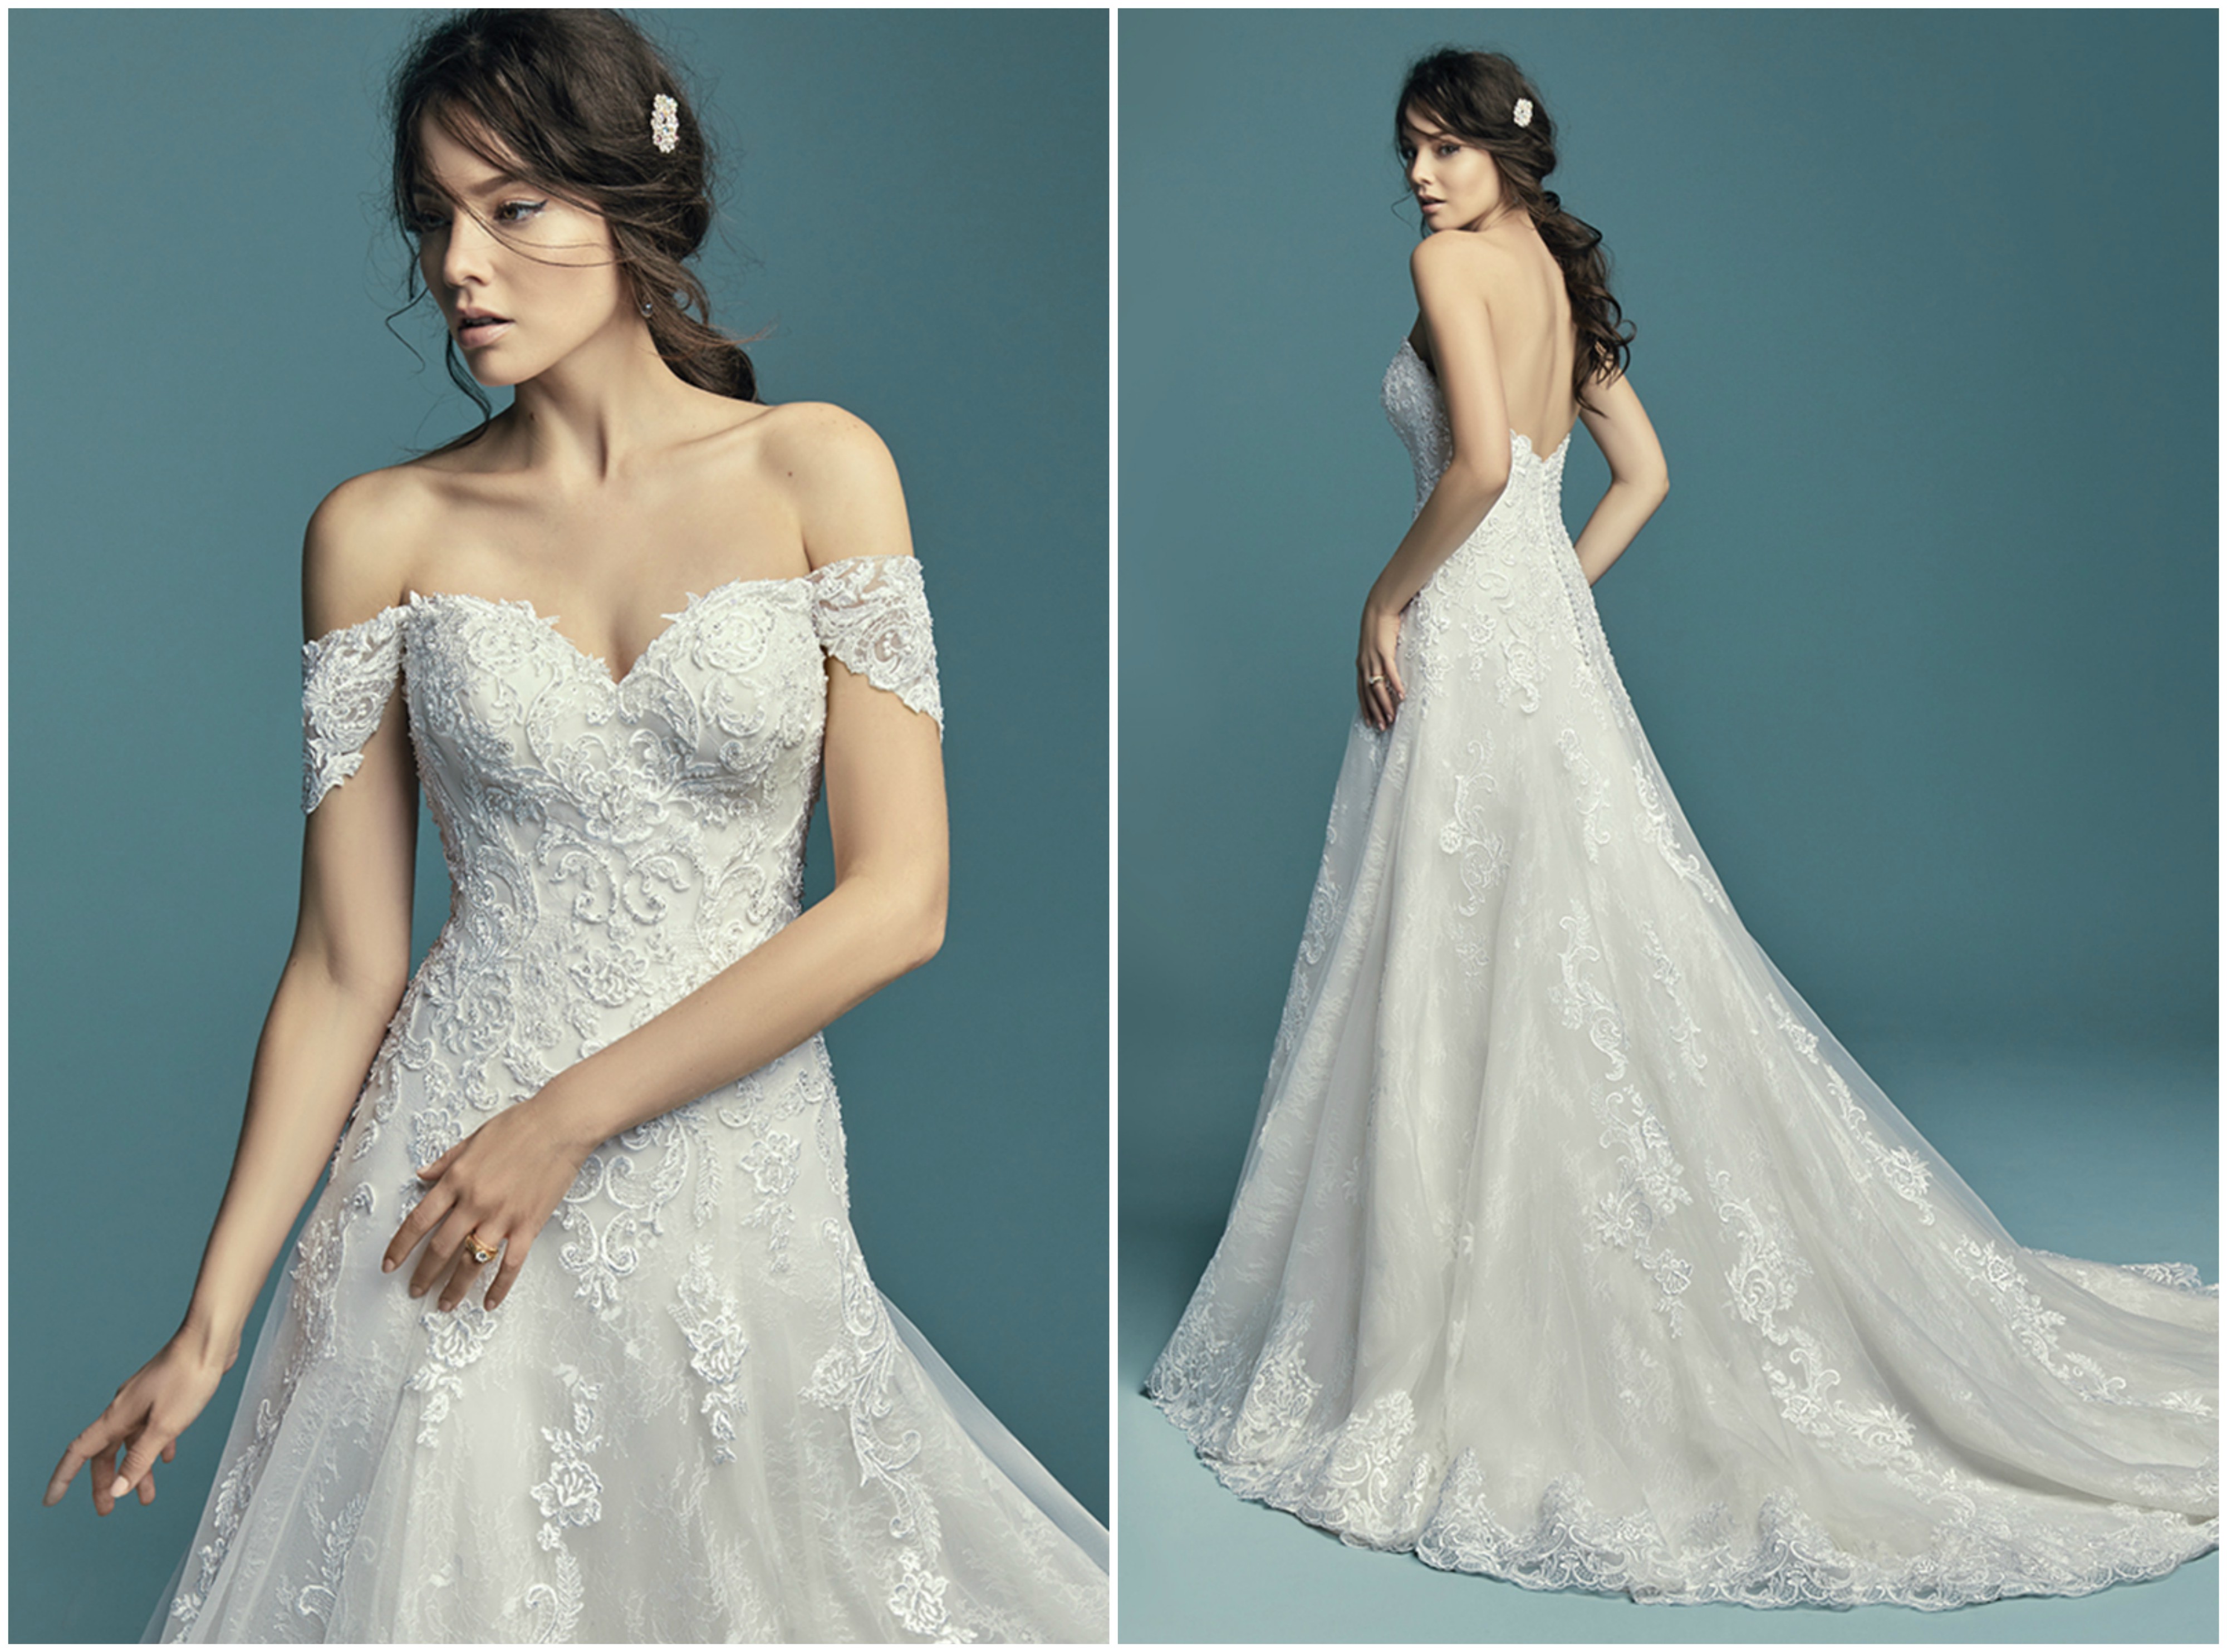 <a href="https://www.maggiesottero.com/maggie-sottero/gail/11475" target="_blank">Maggie Sottero</a>